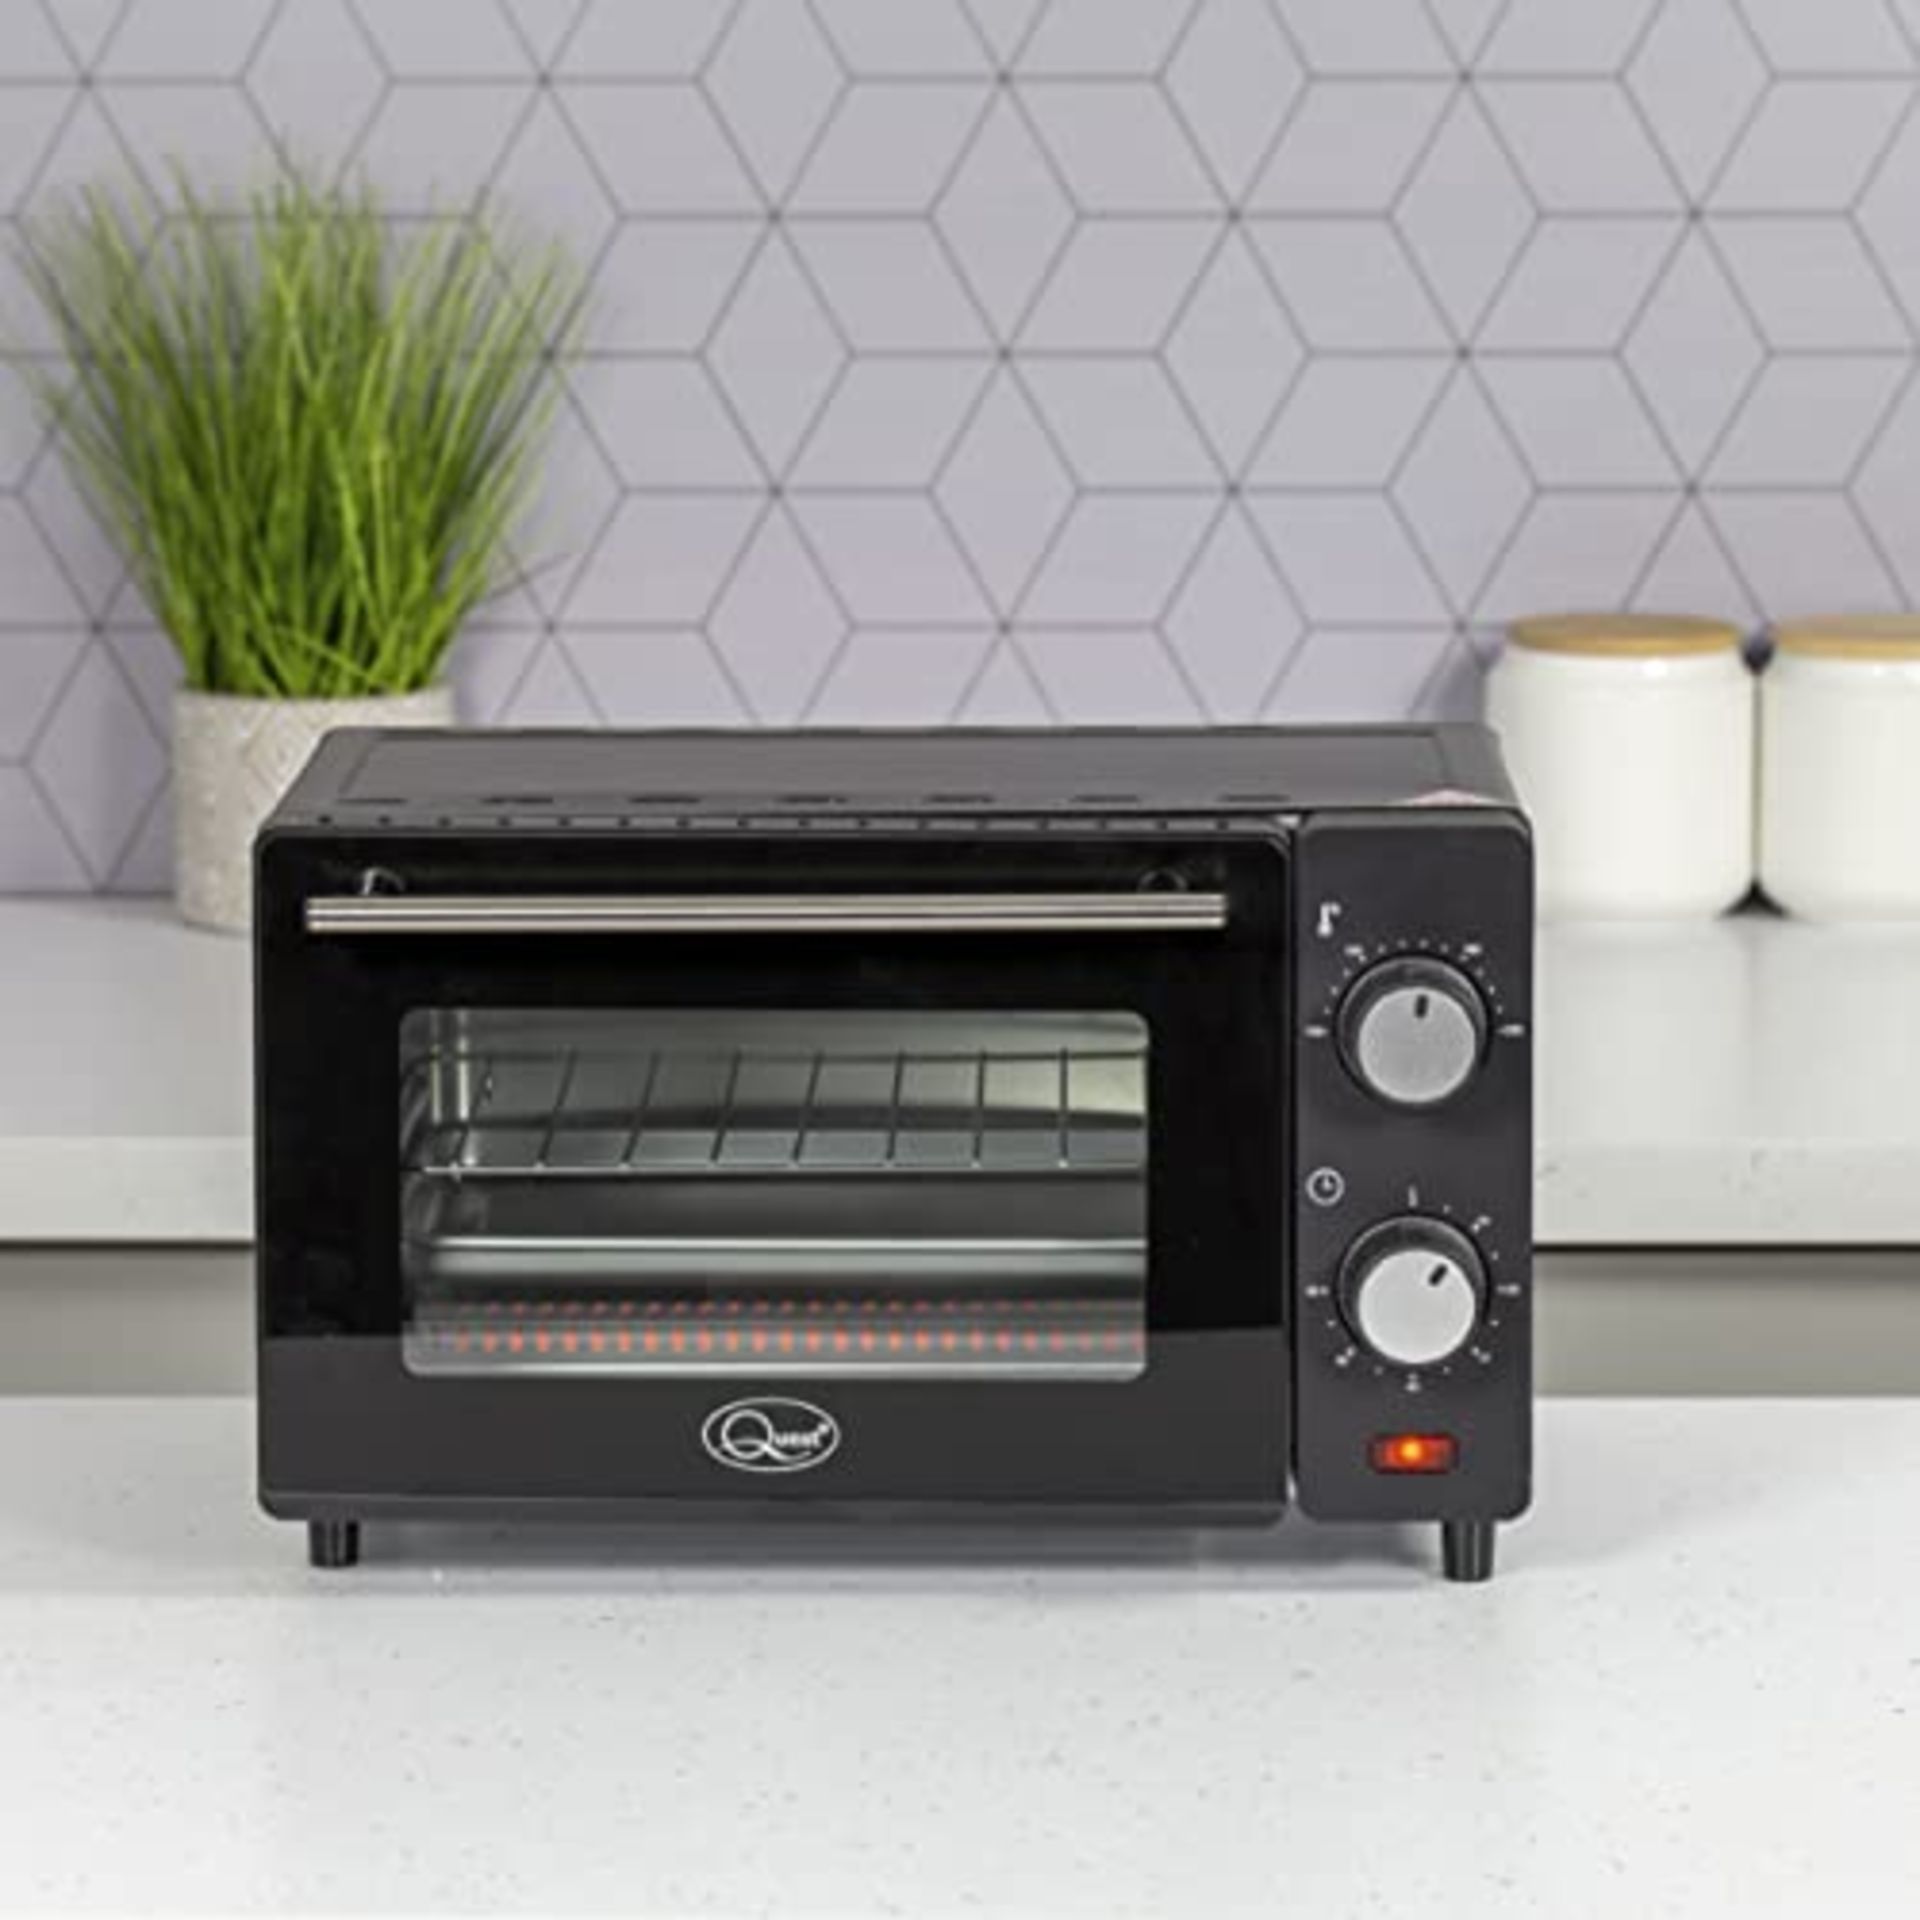 Quest 35409 Compact 9L Mini Oven/Temperature Controlled from 100-230° / 60 Minute Tim